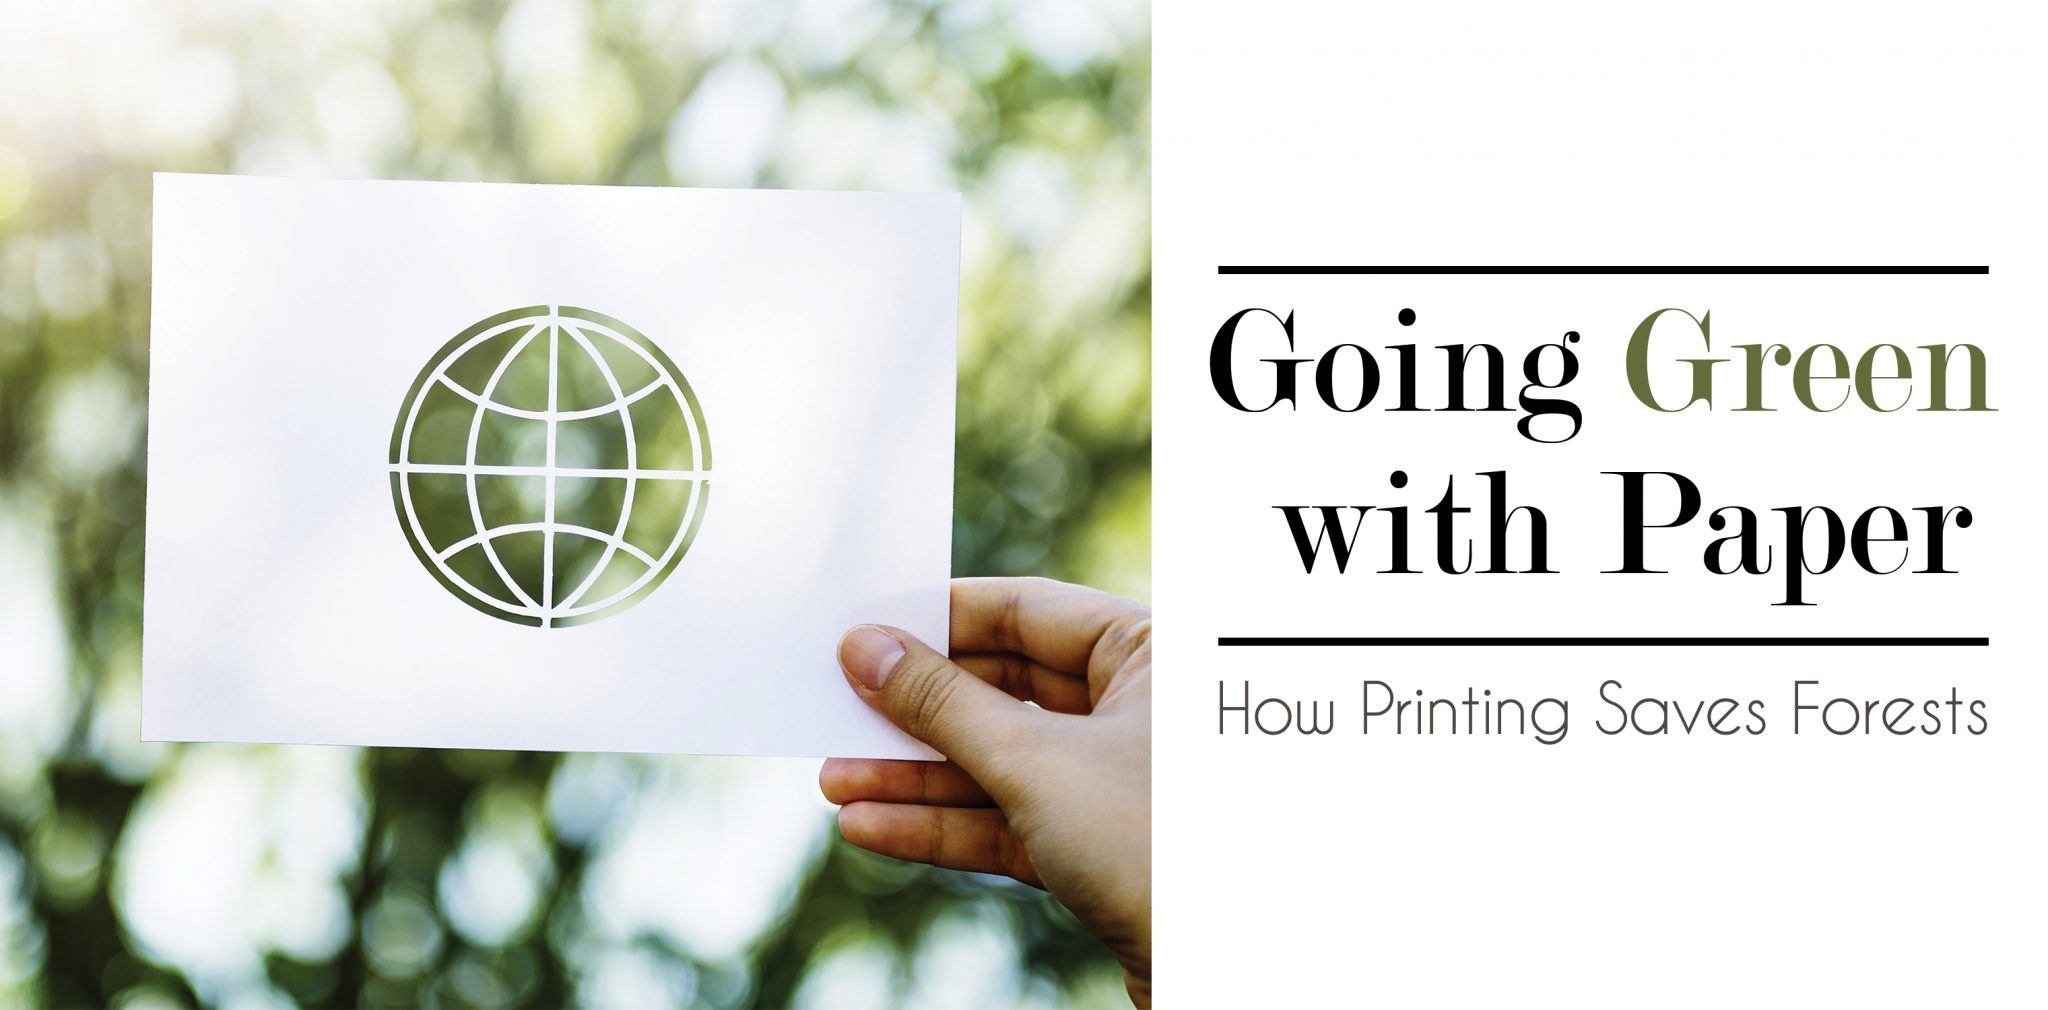 Going Green with Paper: How Printing Saves Forests